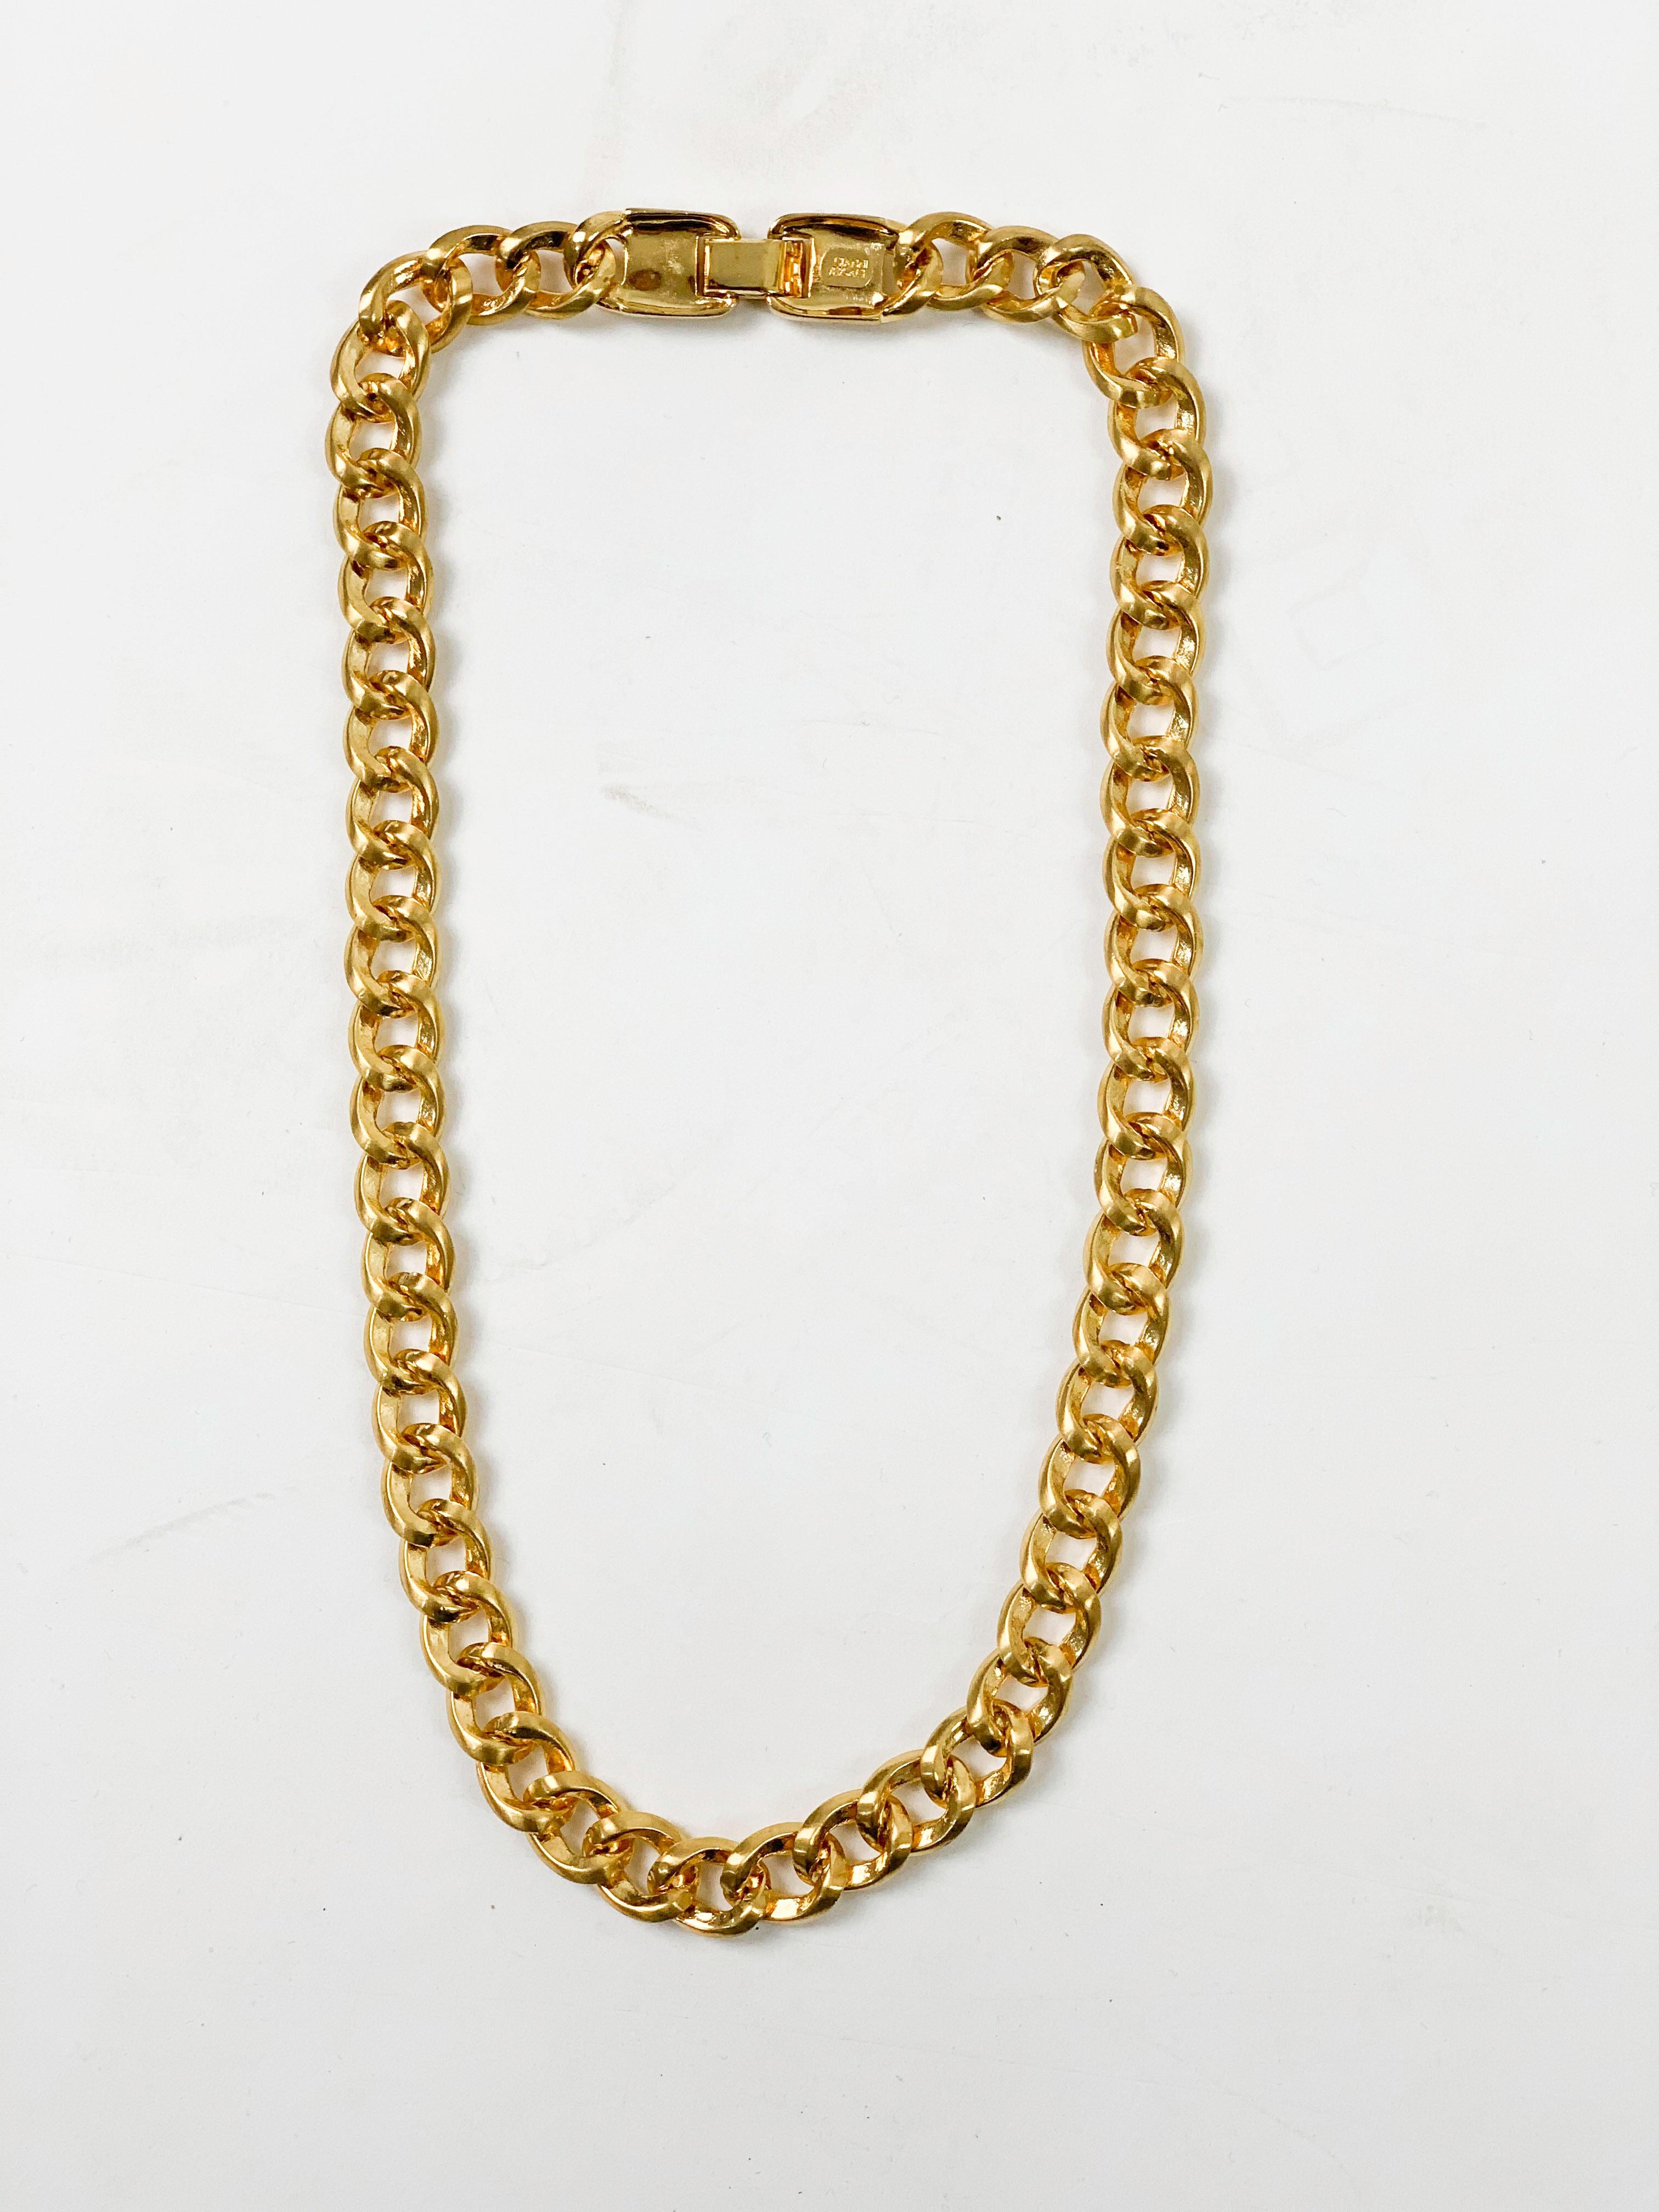 This Gianni Versace curb chain is made in Italy from a gold tone metal. The brushed gold chain features crystals within the chain and the fastening is the famous medusa head logo. Stamped with Gianni Versace this simple yet bold item is in true